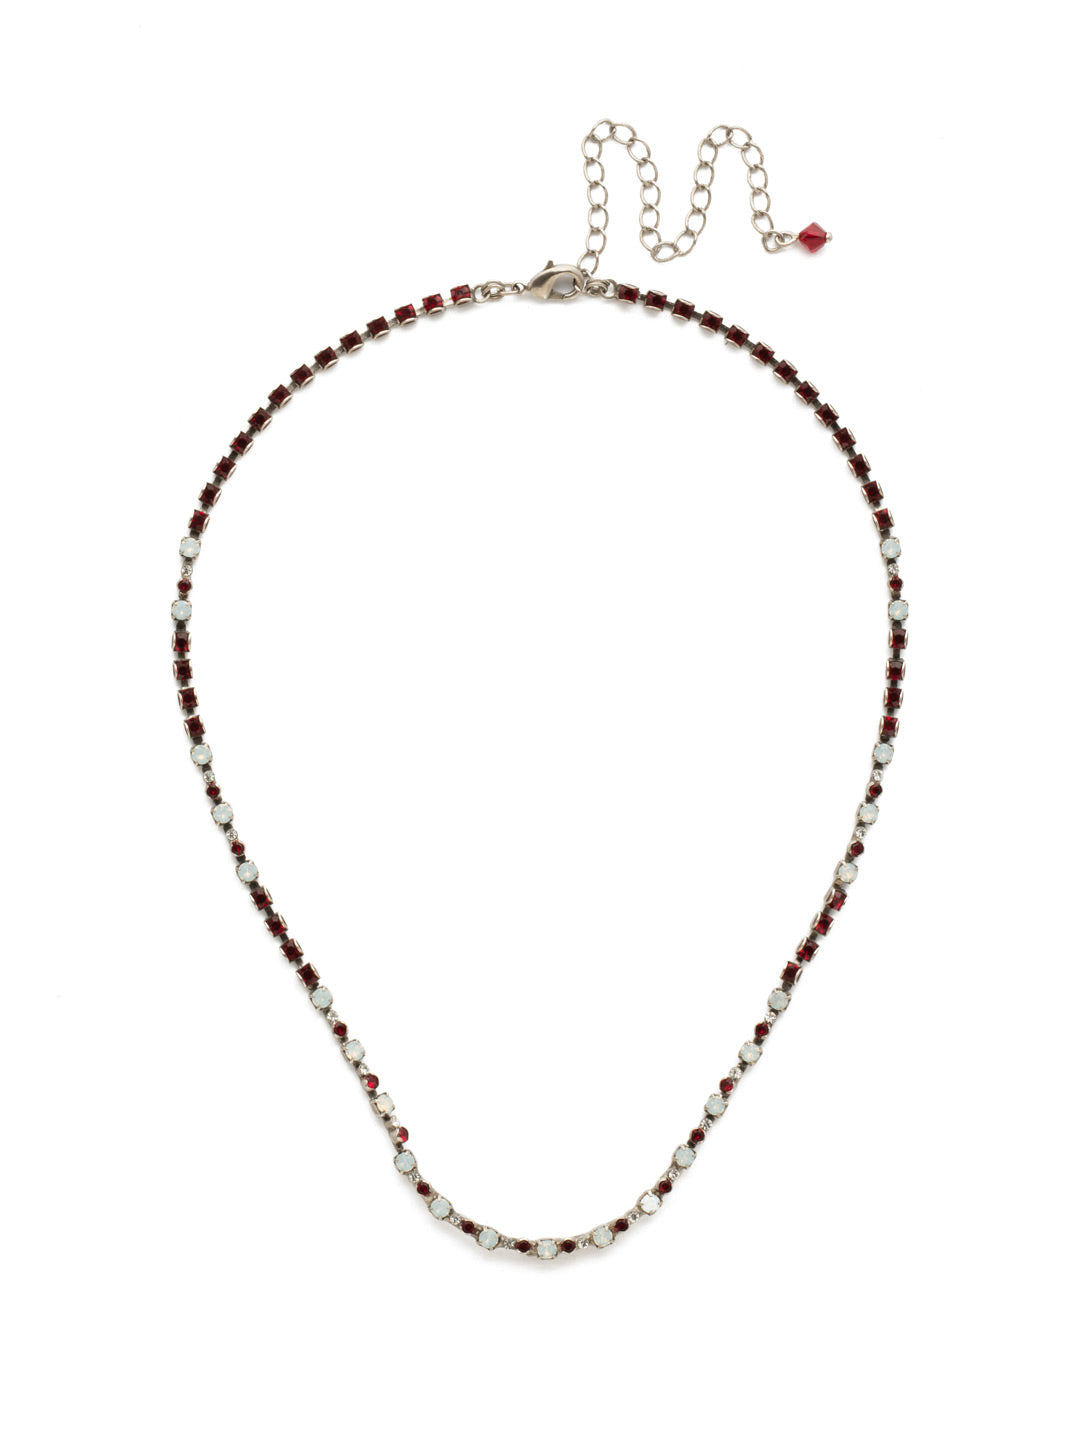 The Skinny Necklace - NDU45ASCP - <p>Petite round crystals in a variety of settings align to form this sleek, slender style. From Sorrelli's Crimson Pride collection in our Antique Silver-tone finish.</p>